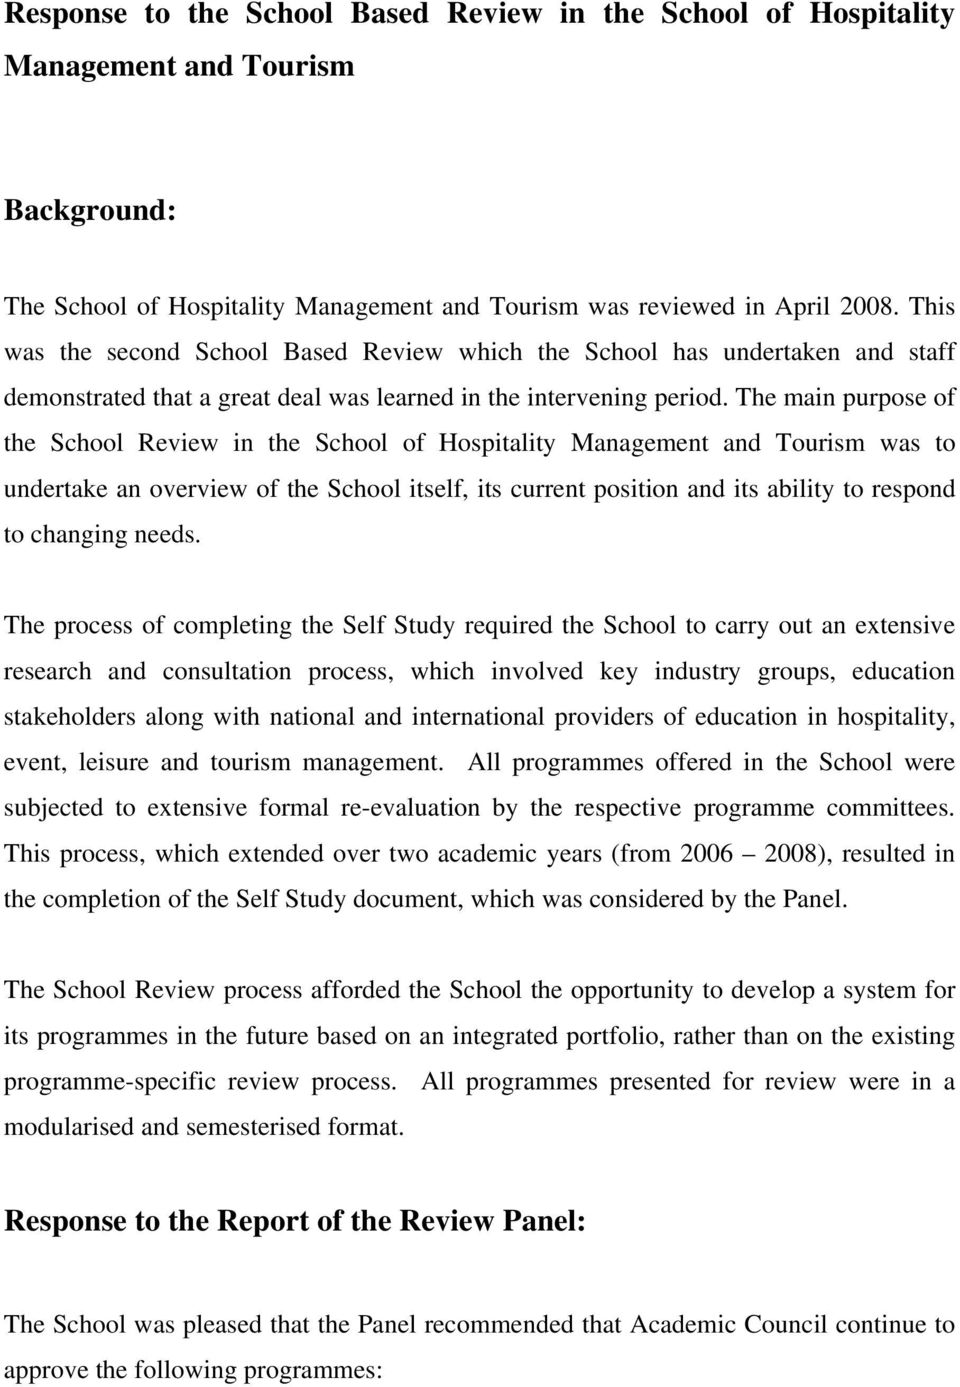 The main purpose of the School Review in the School of Hospitality Management and Tourism was to undertake an overview of the School itself, its current position and its ability to respond to